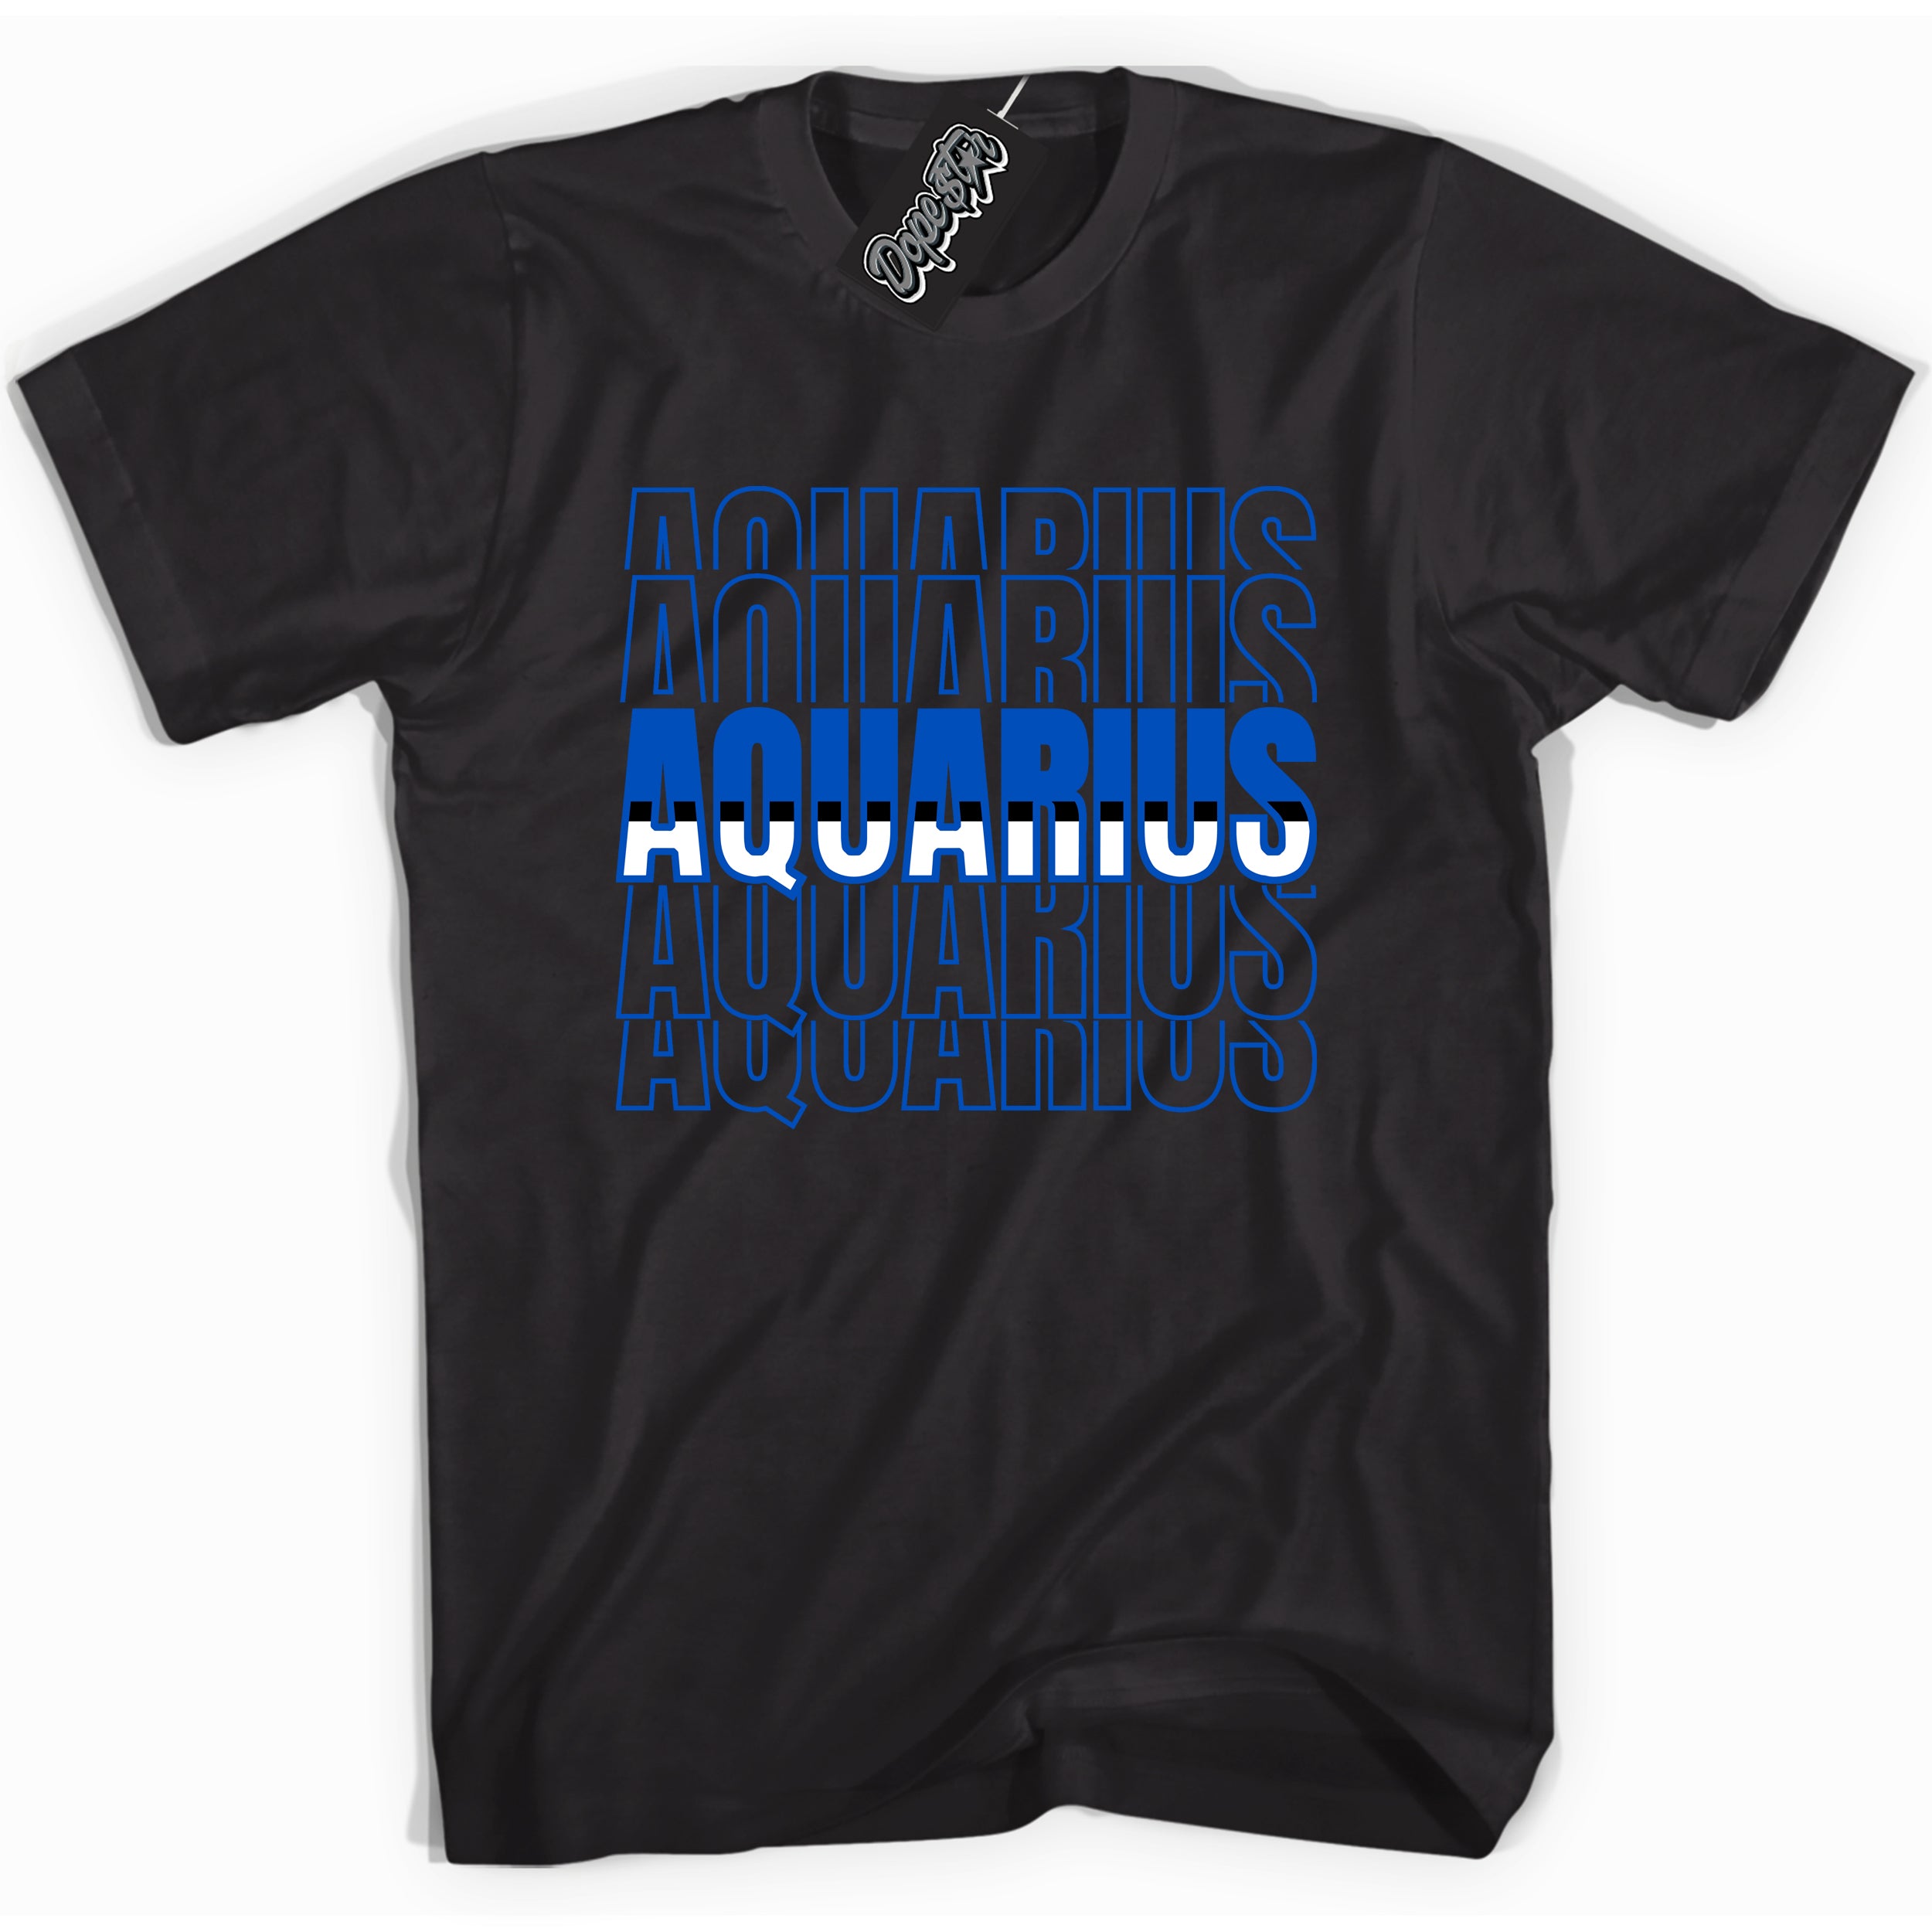 Cool Black graphic tee with "Aquarius" design, that perfectly matches Royal Reimagined 1s sneakers 